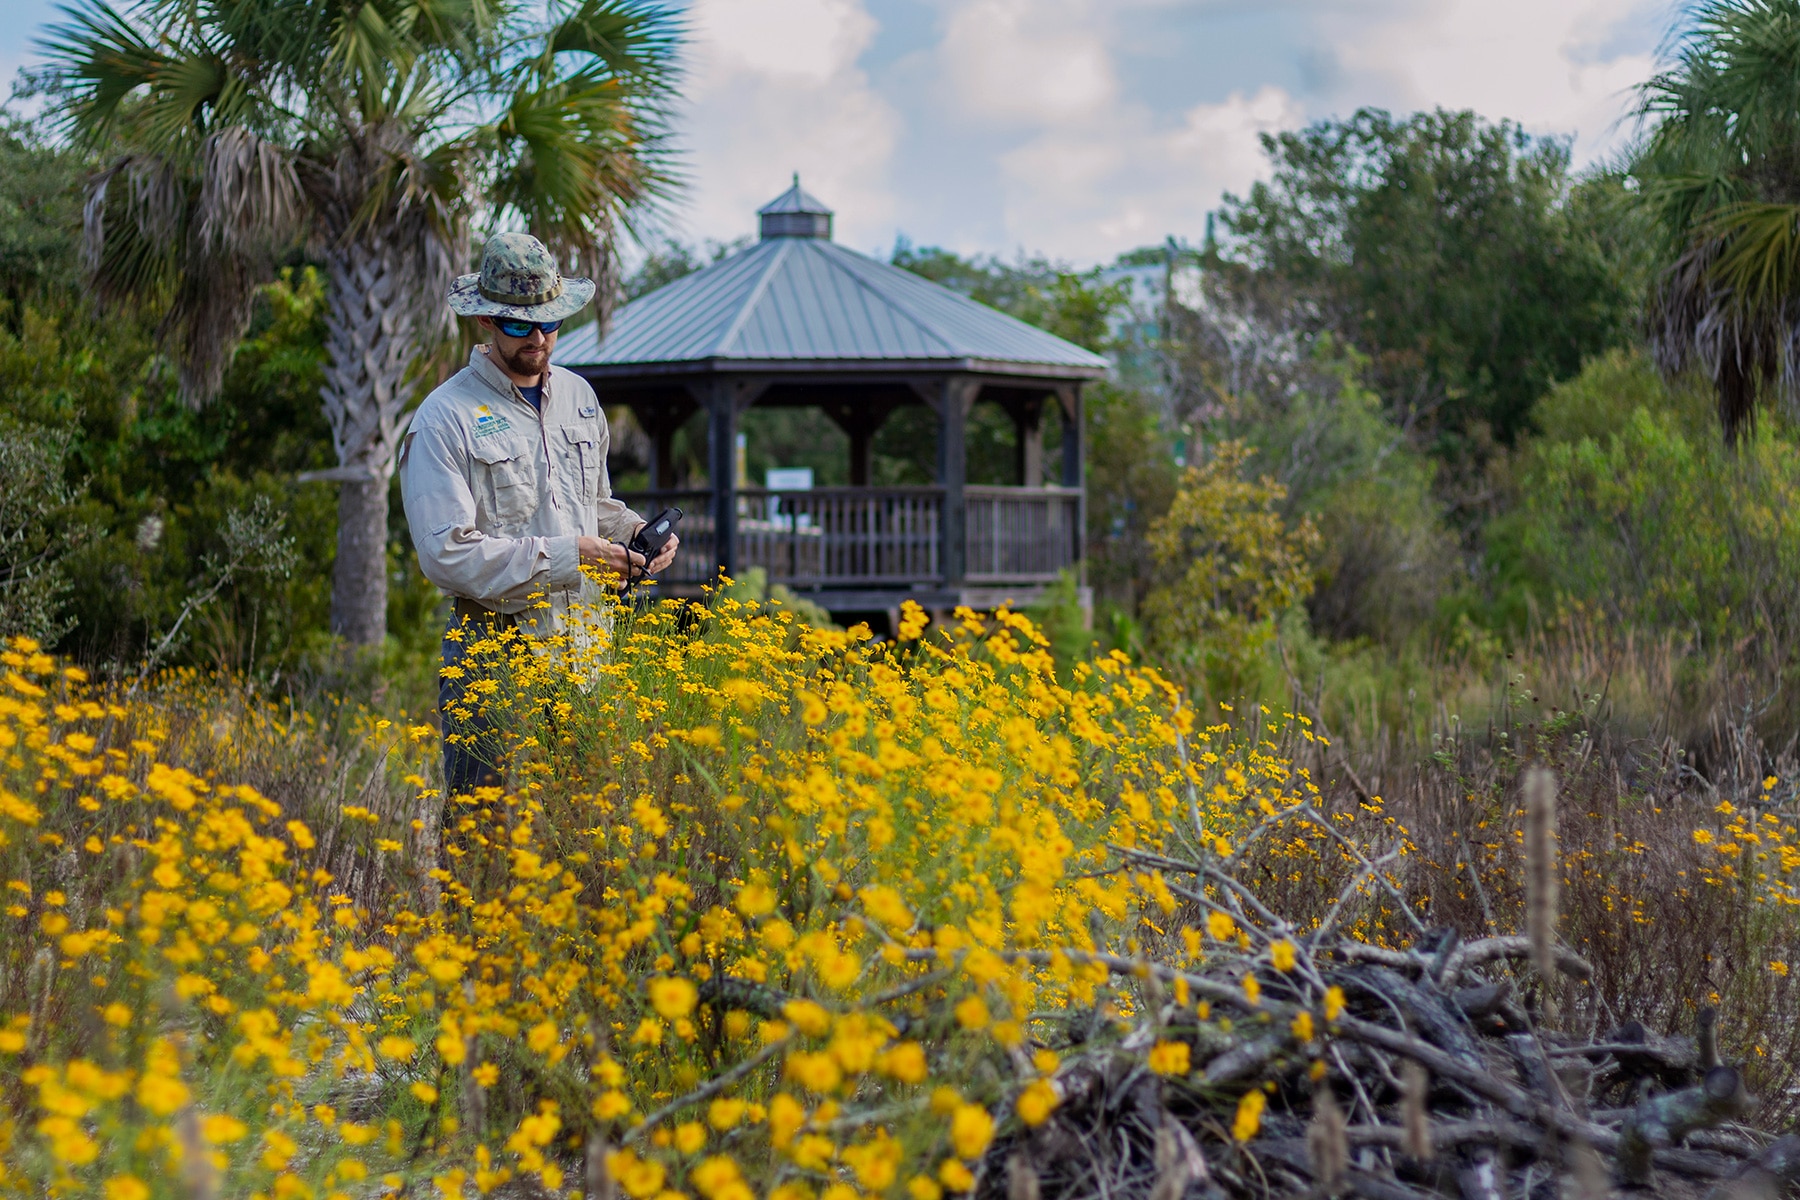 Conservancy of Southwest Florida biologist surveying species surrounded by yellow flowers